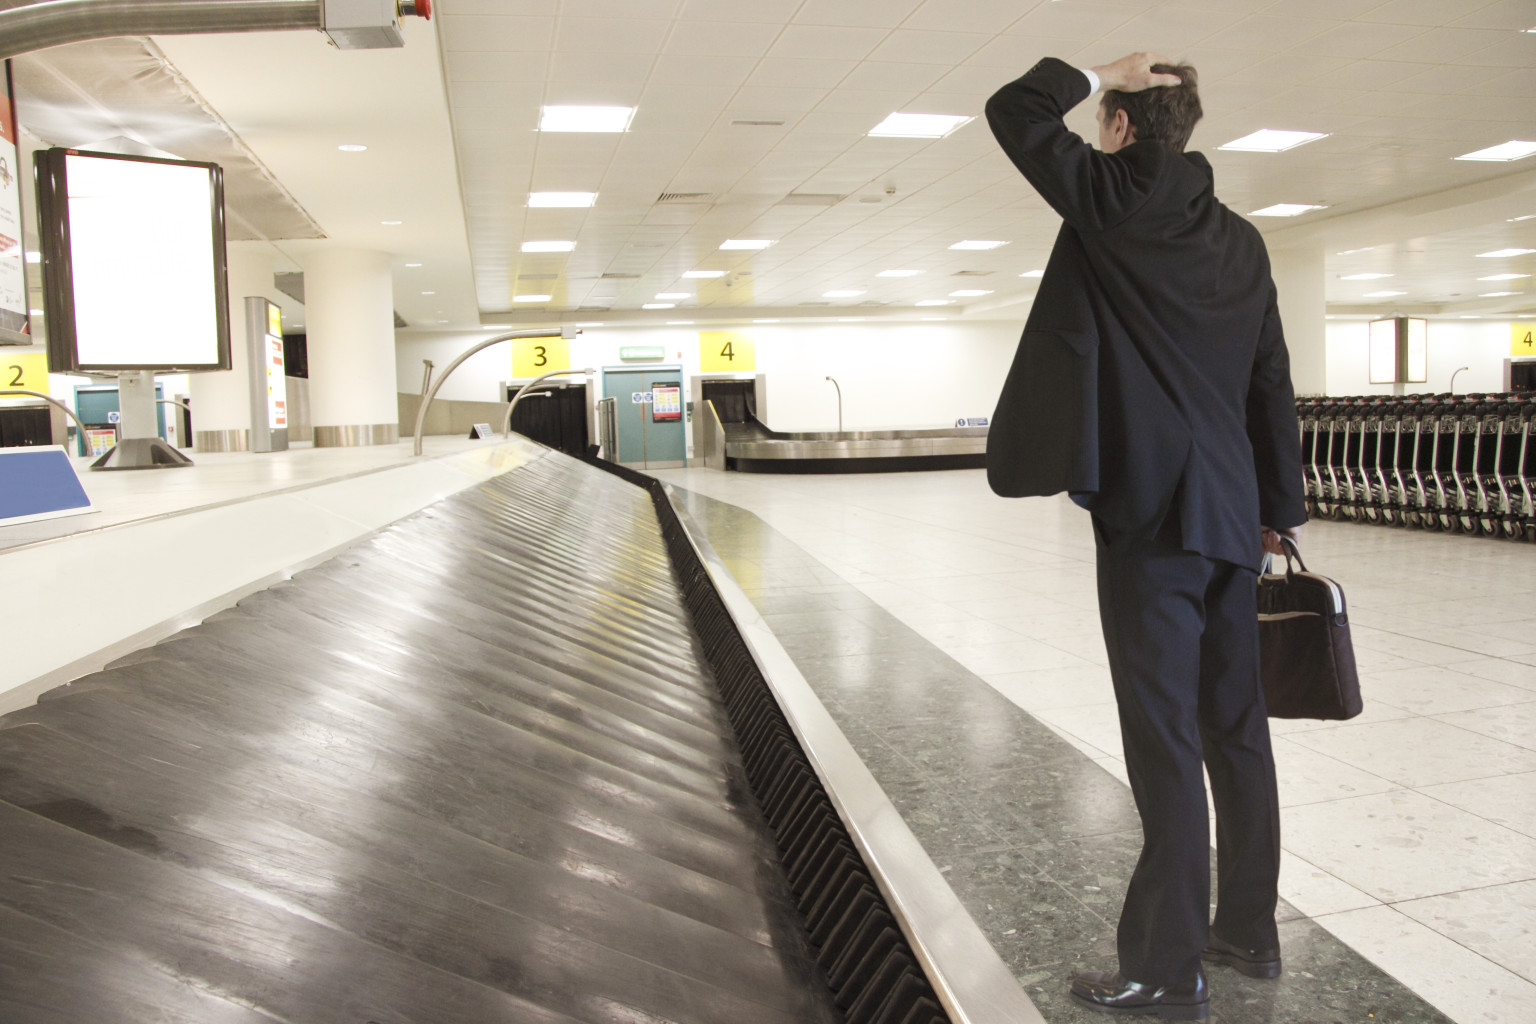 Top 10 Travel Mistakes and How Not to Make Them | HuffPost